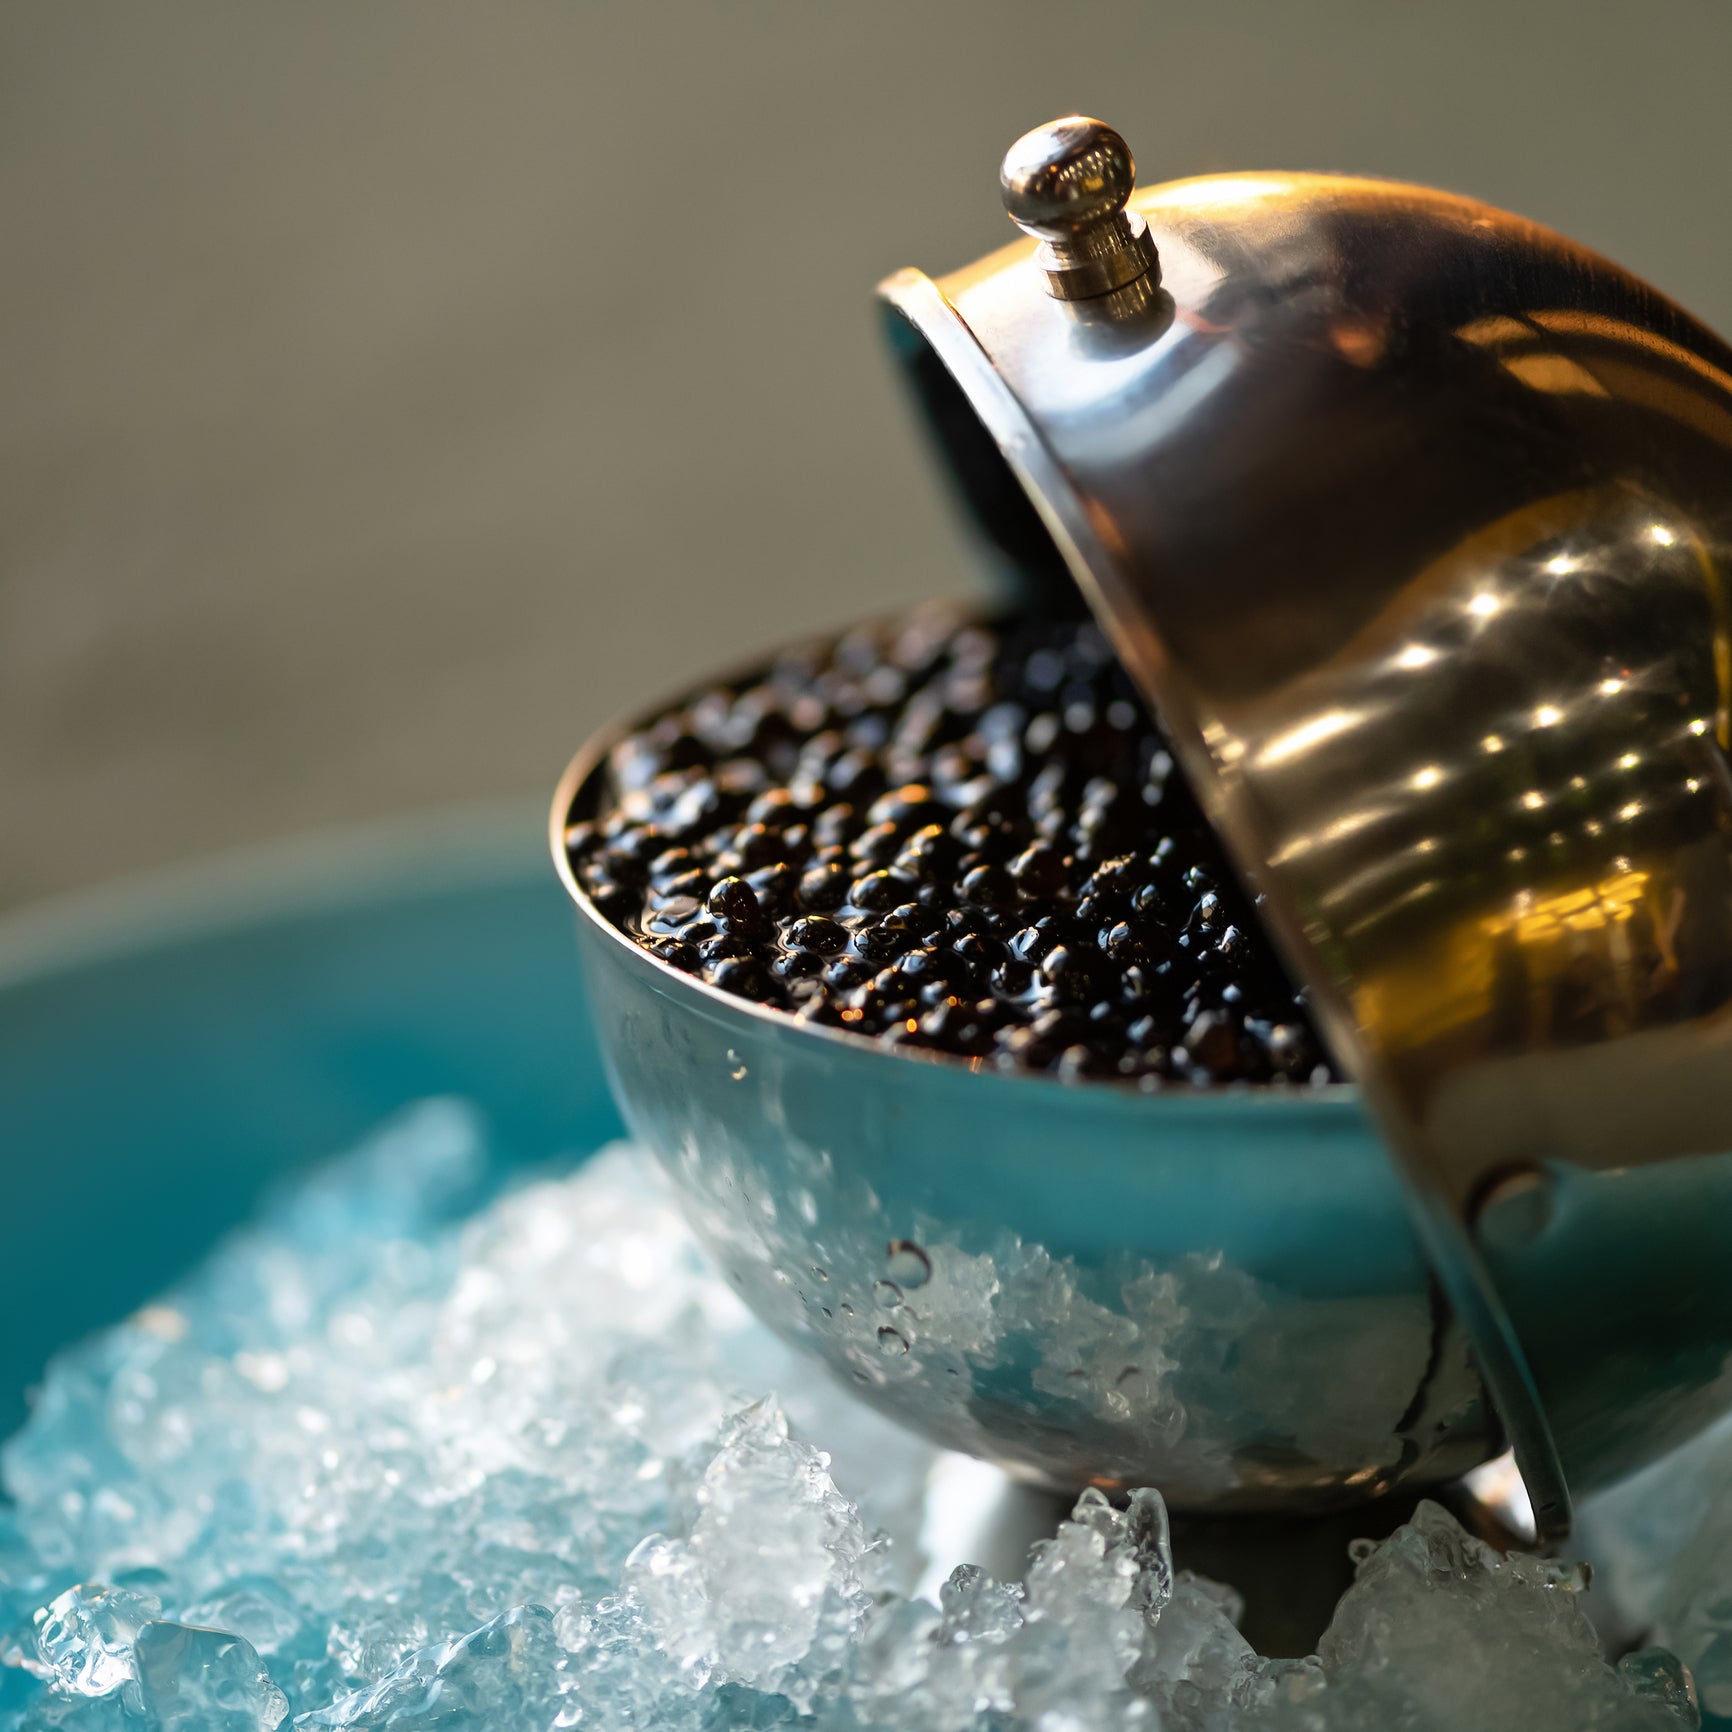 The Top 10 Black Caviar Dishes from Around the World